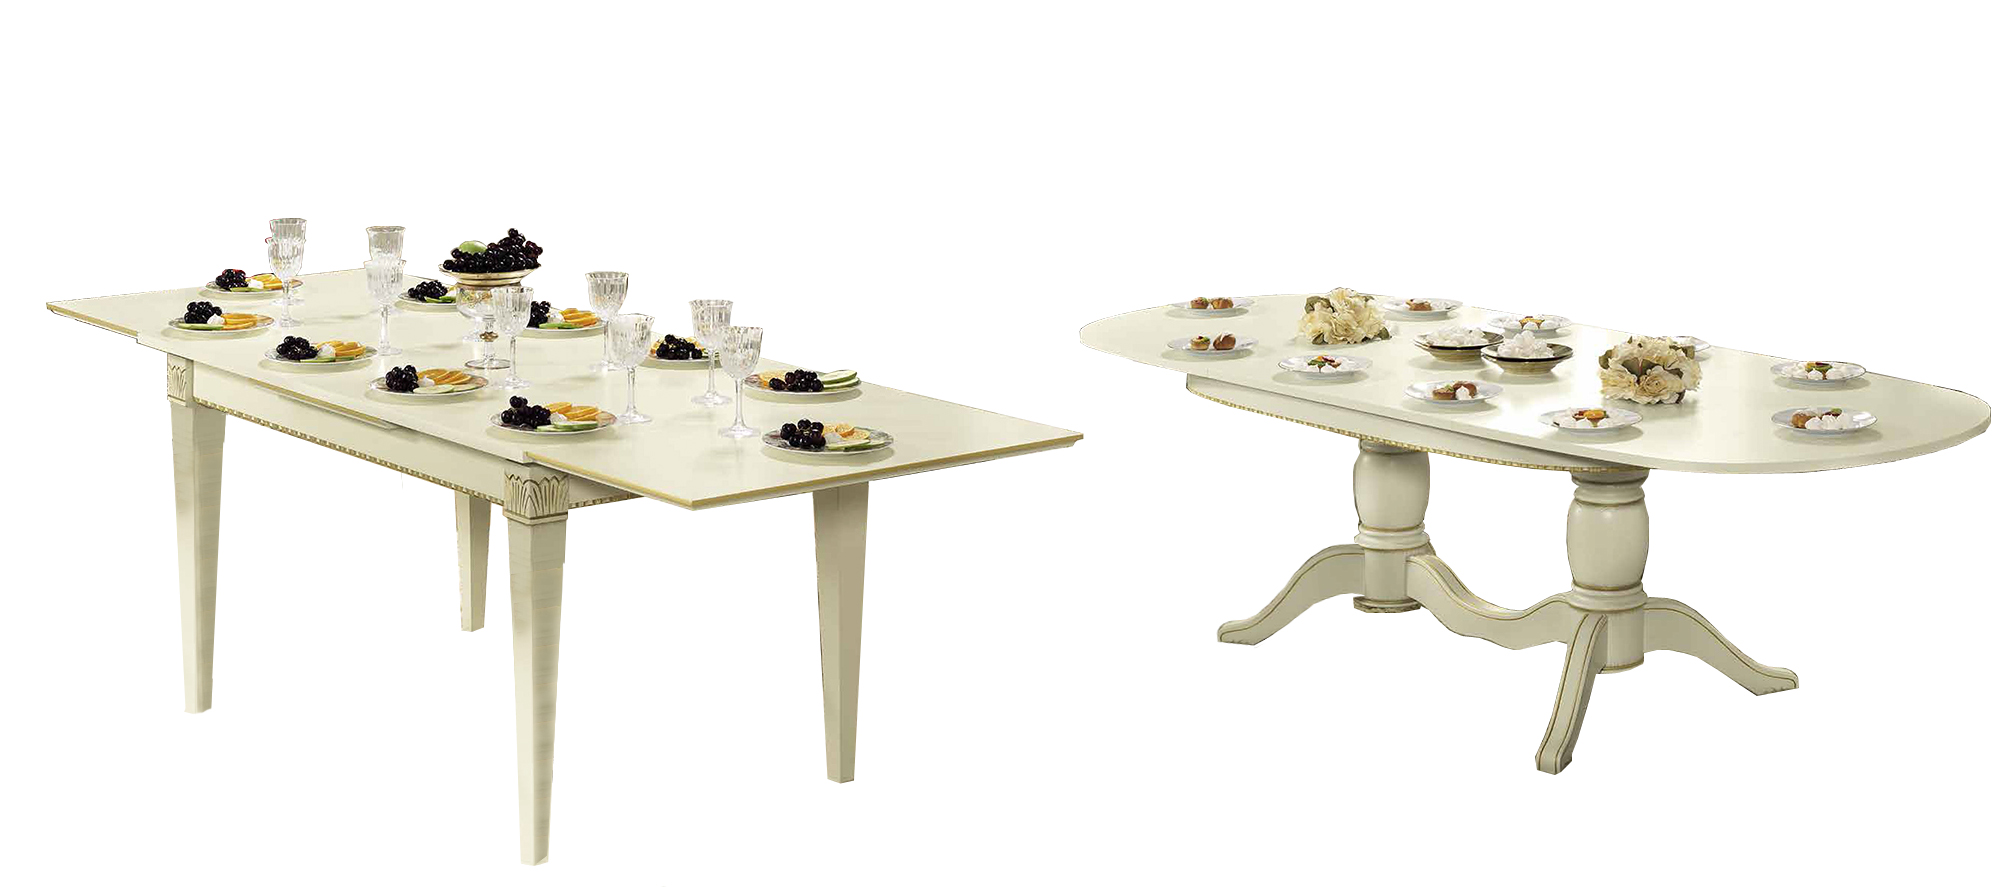 Dining Room Furniture Kitchen Tables and Chairs Sets Treviso White Ash Tables